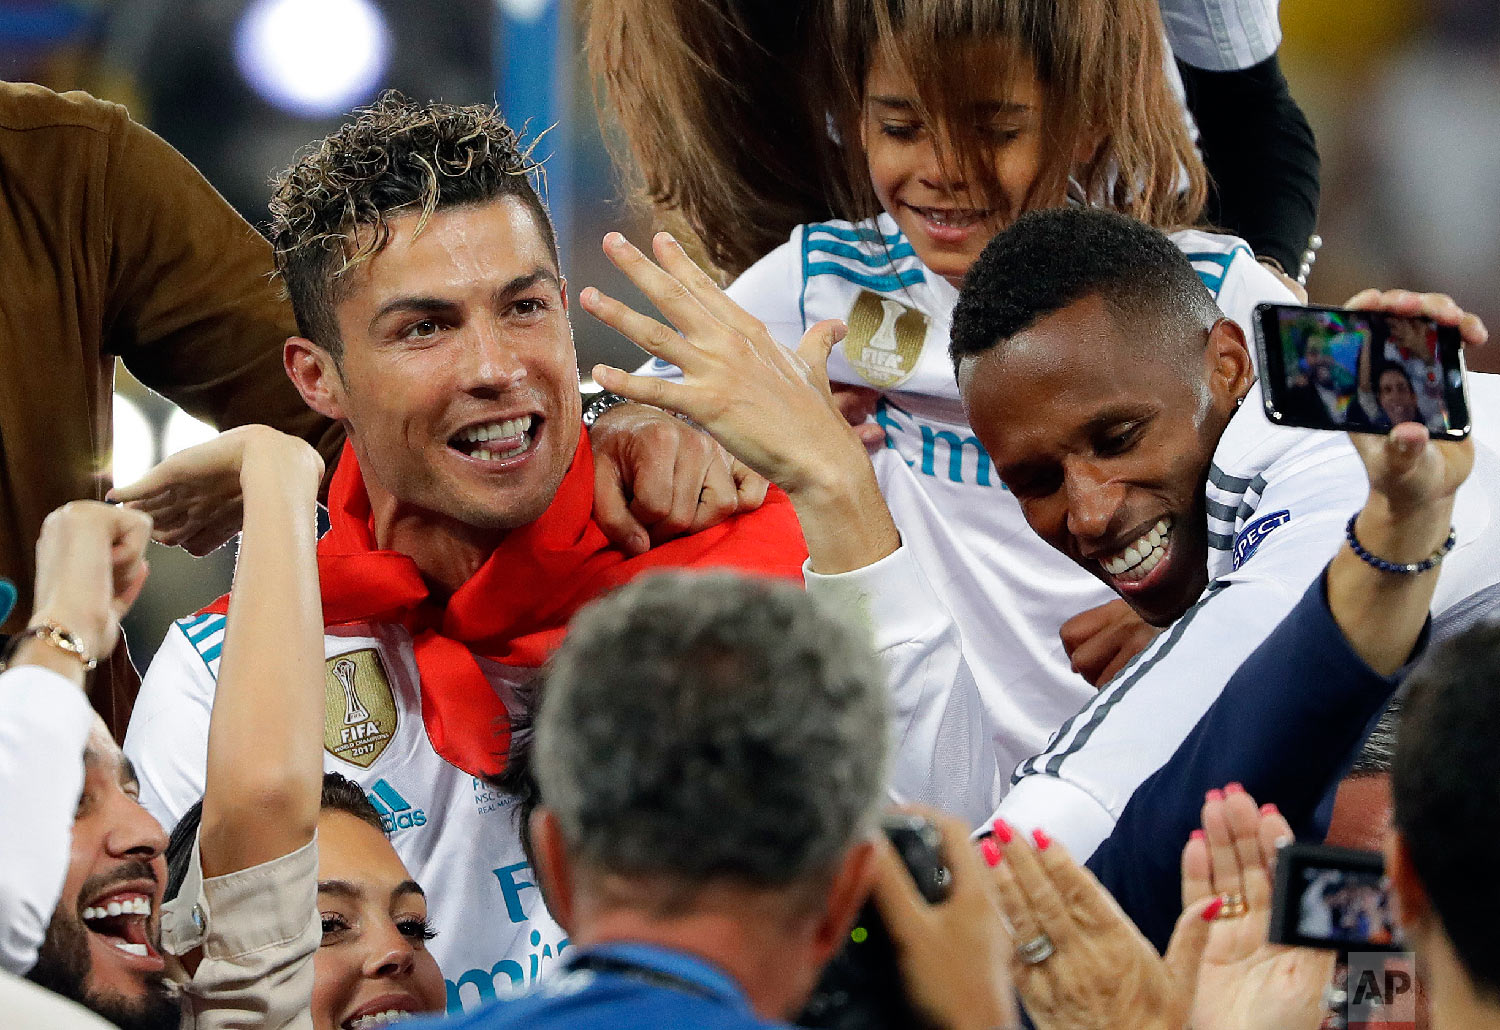  Real Madrid's Cristiano Ronaldo celebrates with fans after winning the Champions League Final soccer match between Real Madrid and Liverpool at the Olimpiyskiy Stadium in Kiev, Ukraine on May 26, 2018. (AP Photo/Sergei Grits) 